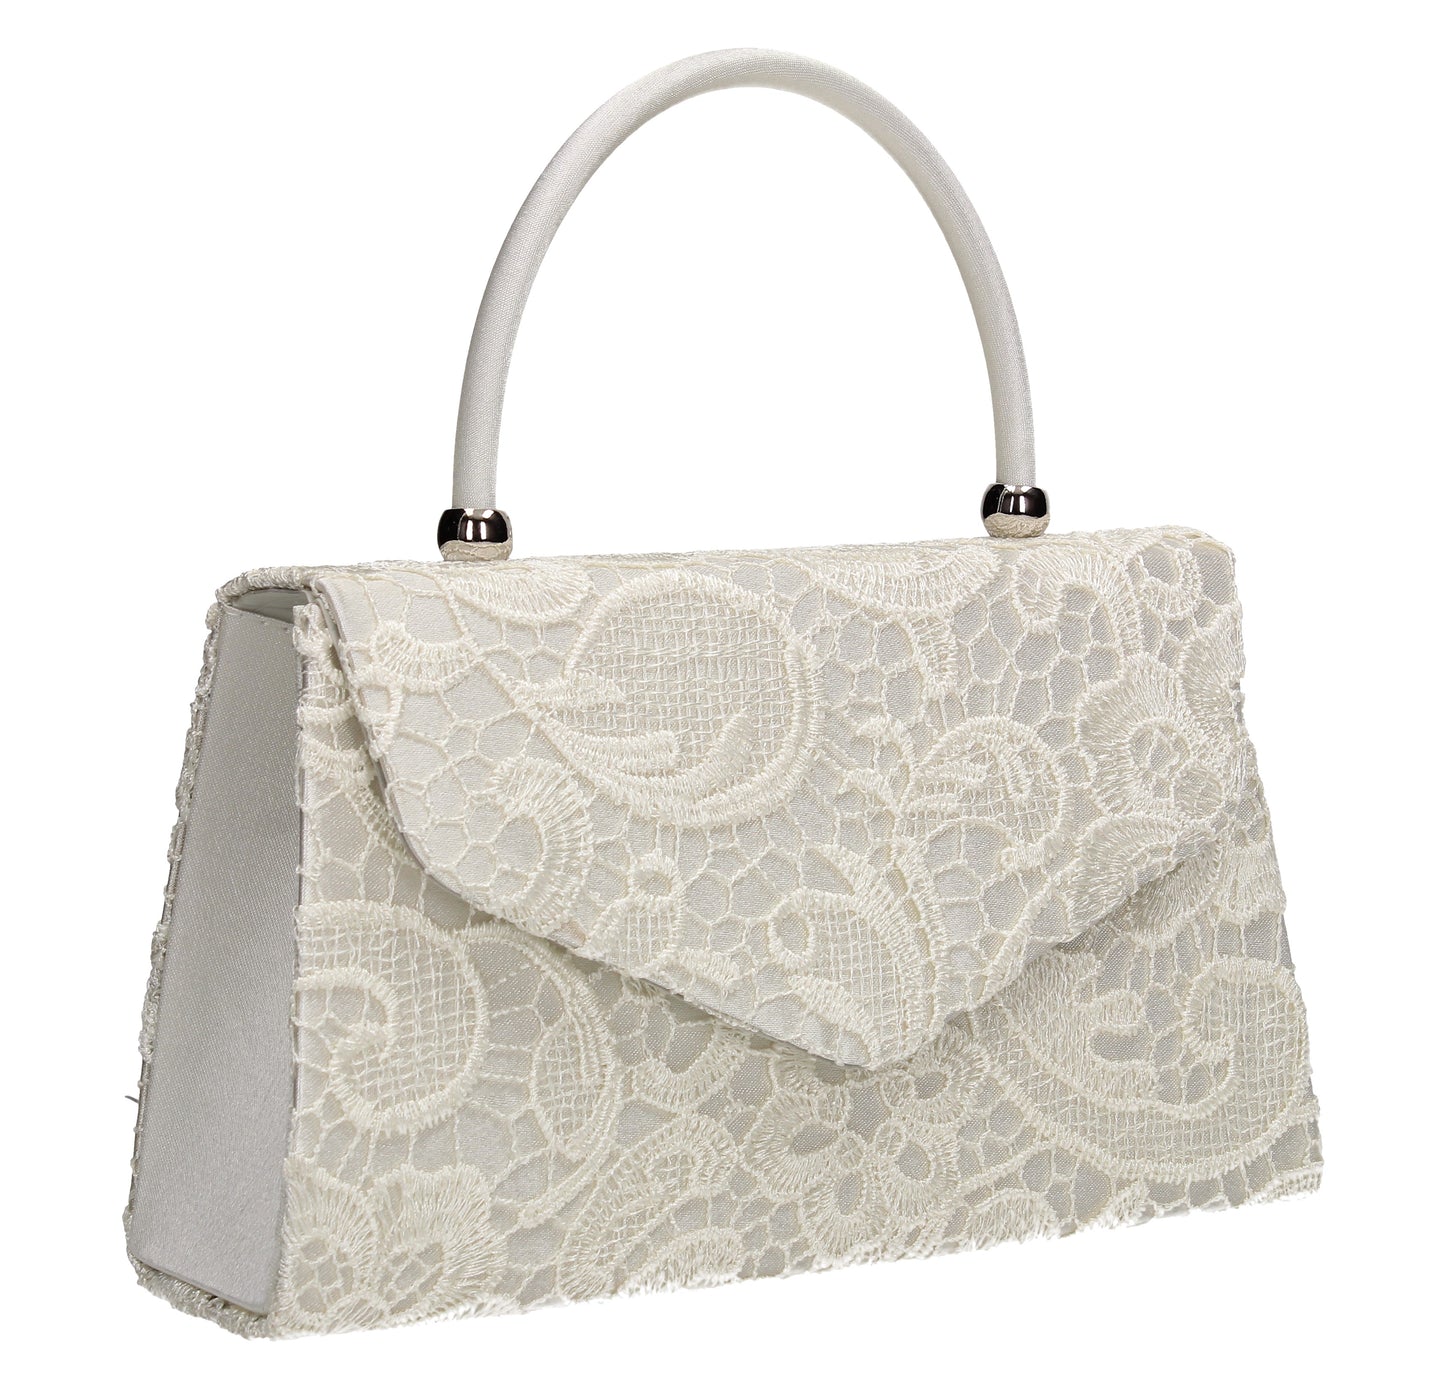 Kendall Lace Clutch Bag Ivory